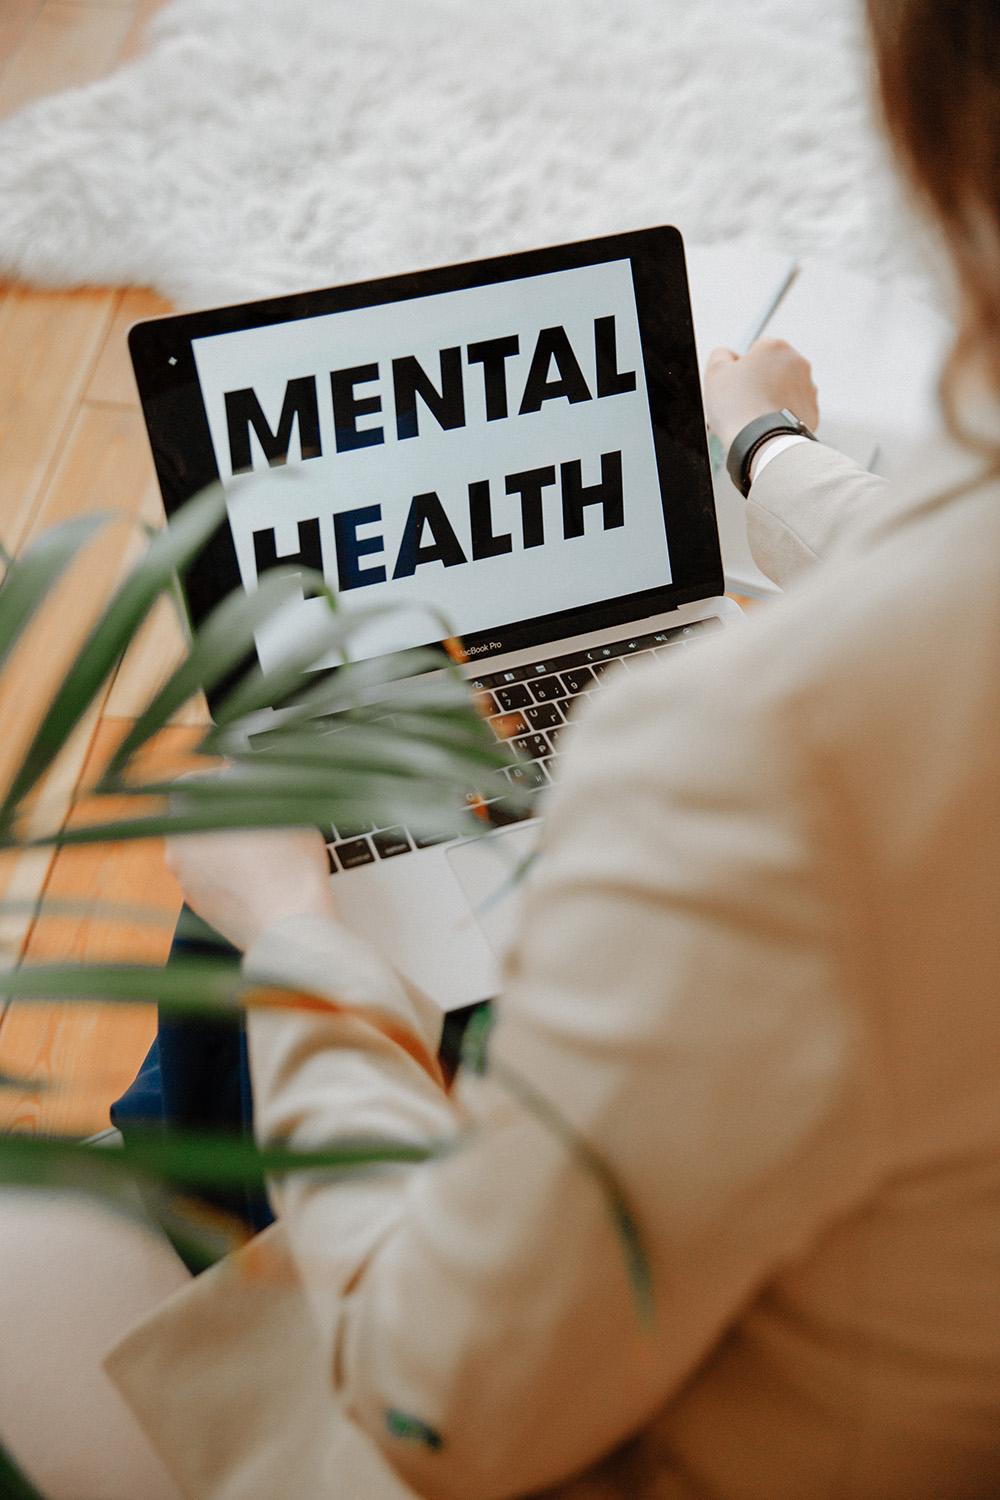 Assisting those with mental health illnesses